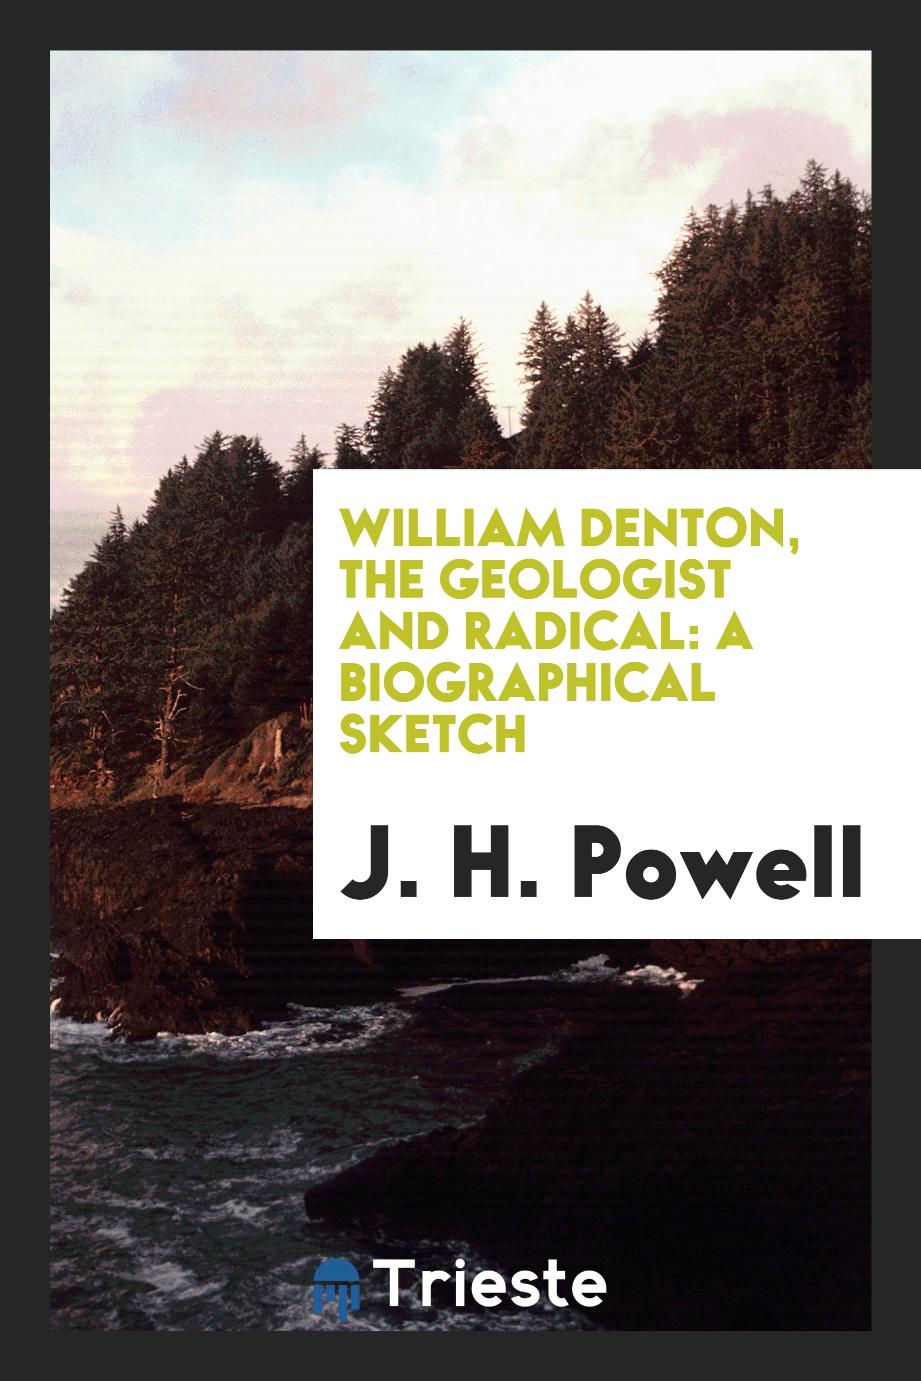 William Denton, the geologist and radical: a biographical sketch